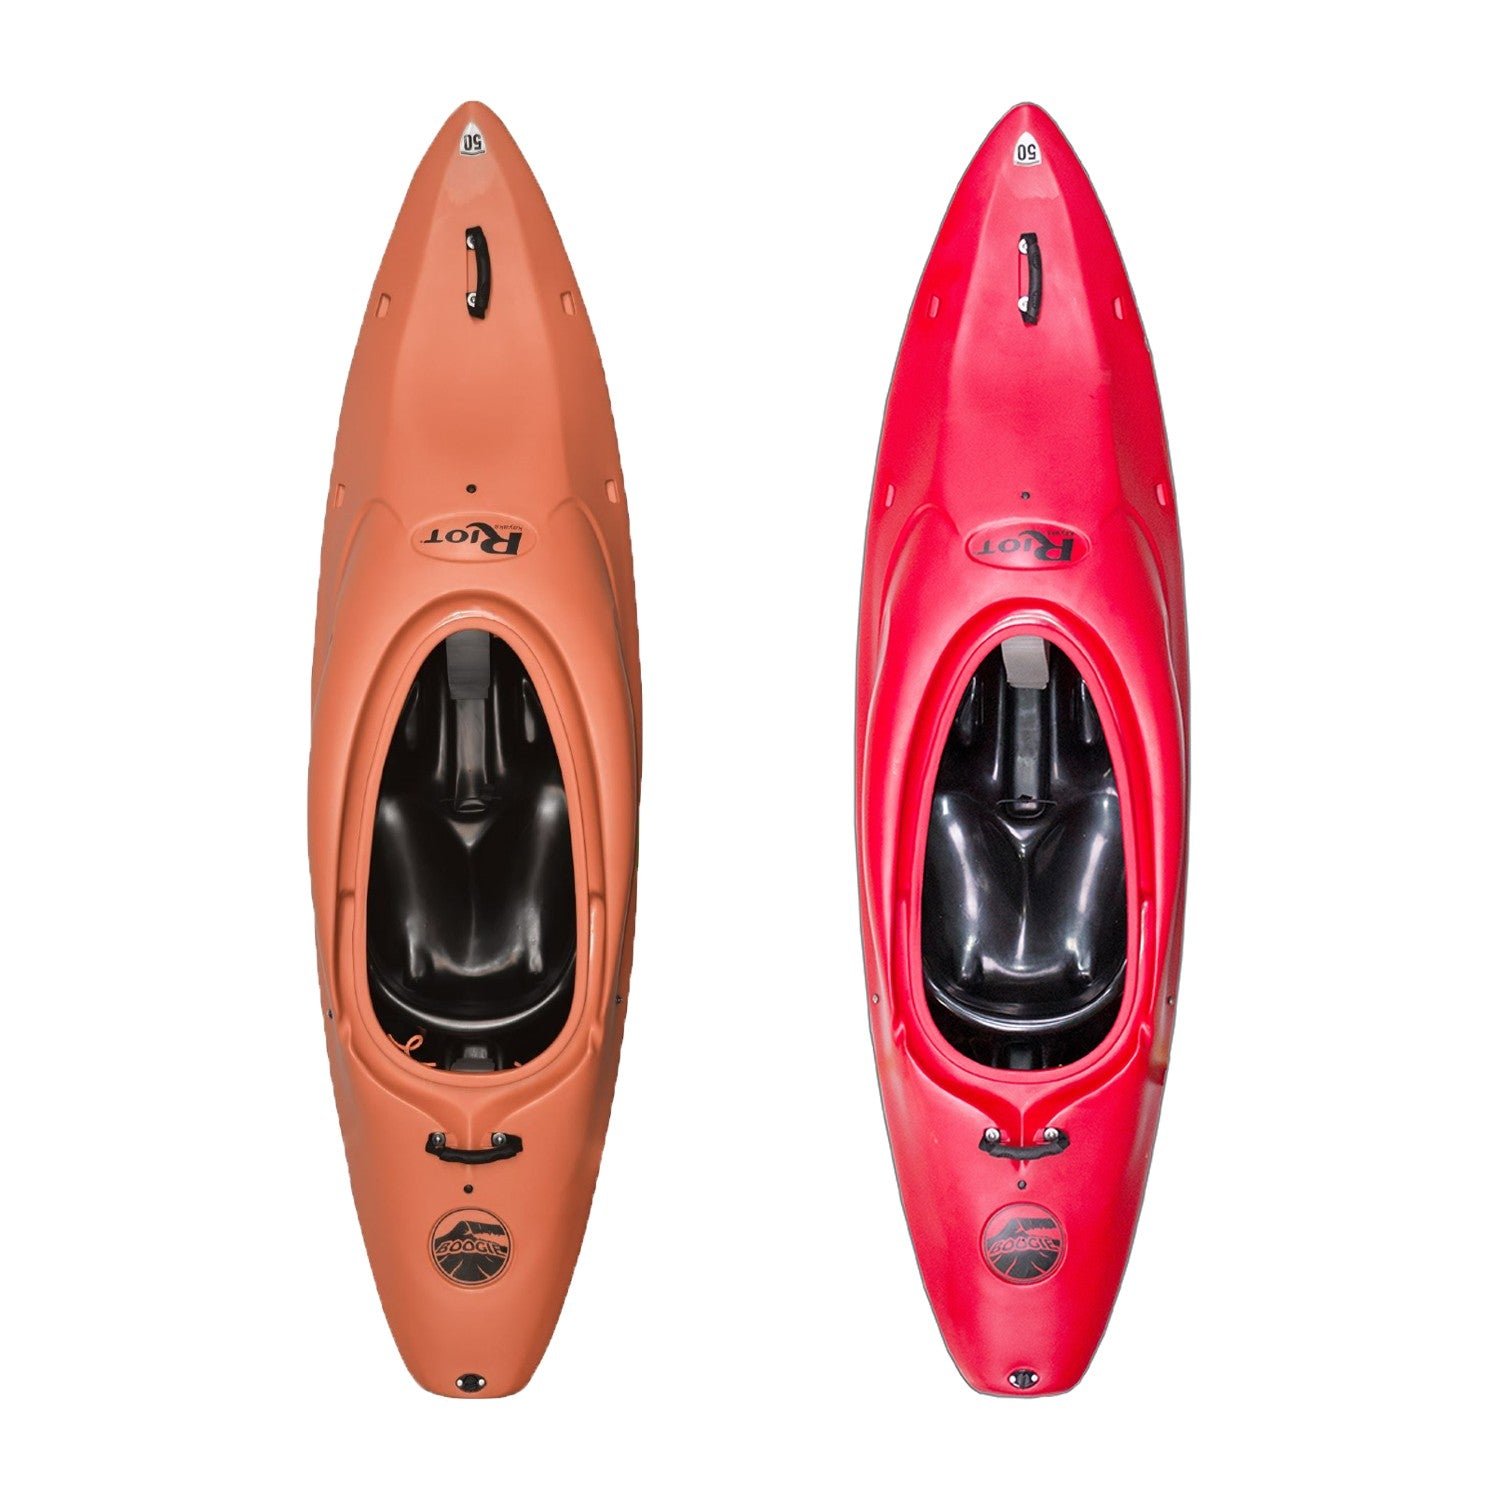 Boogie 50 Kayak in Red and Orange